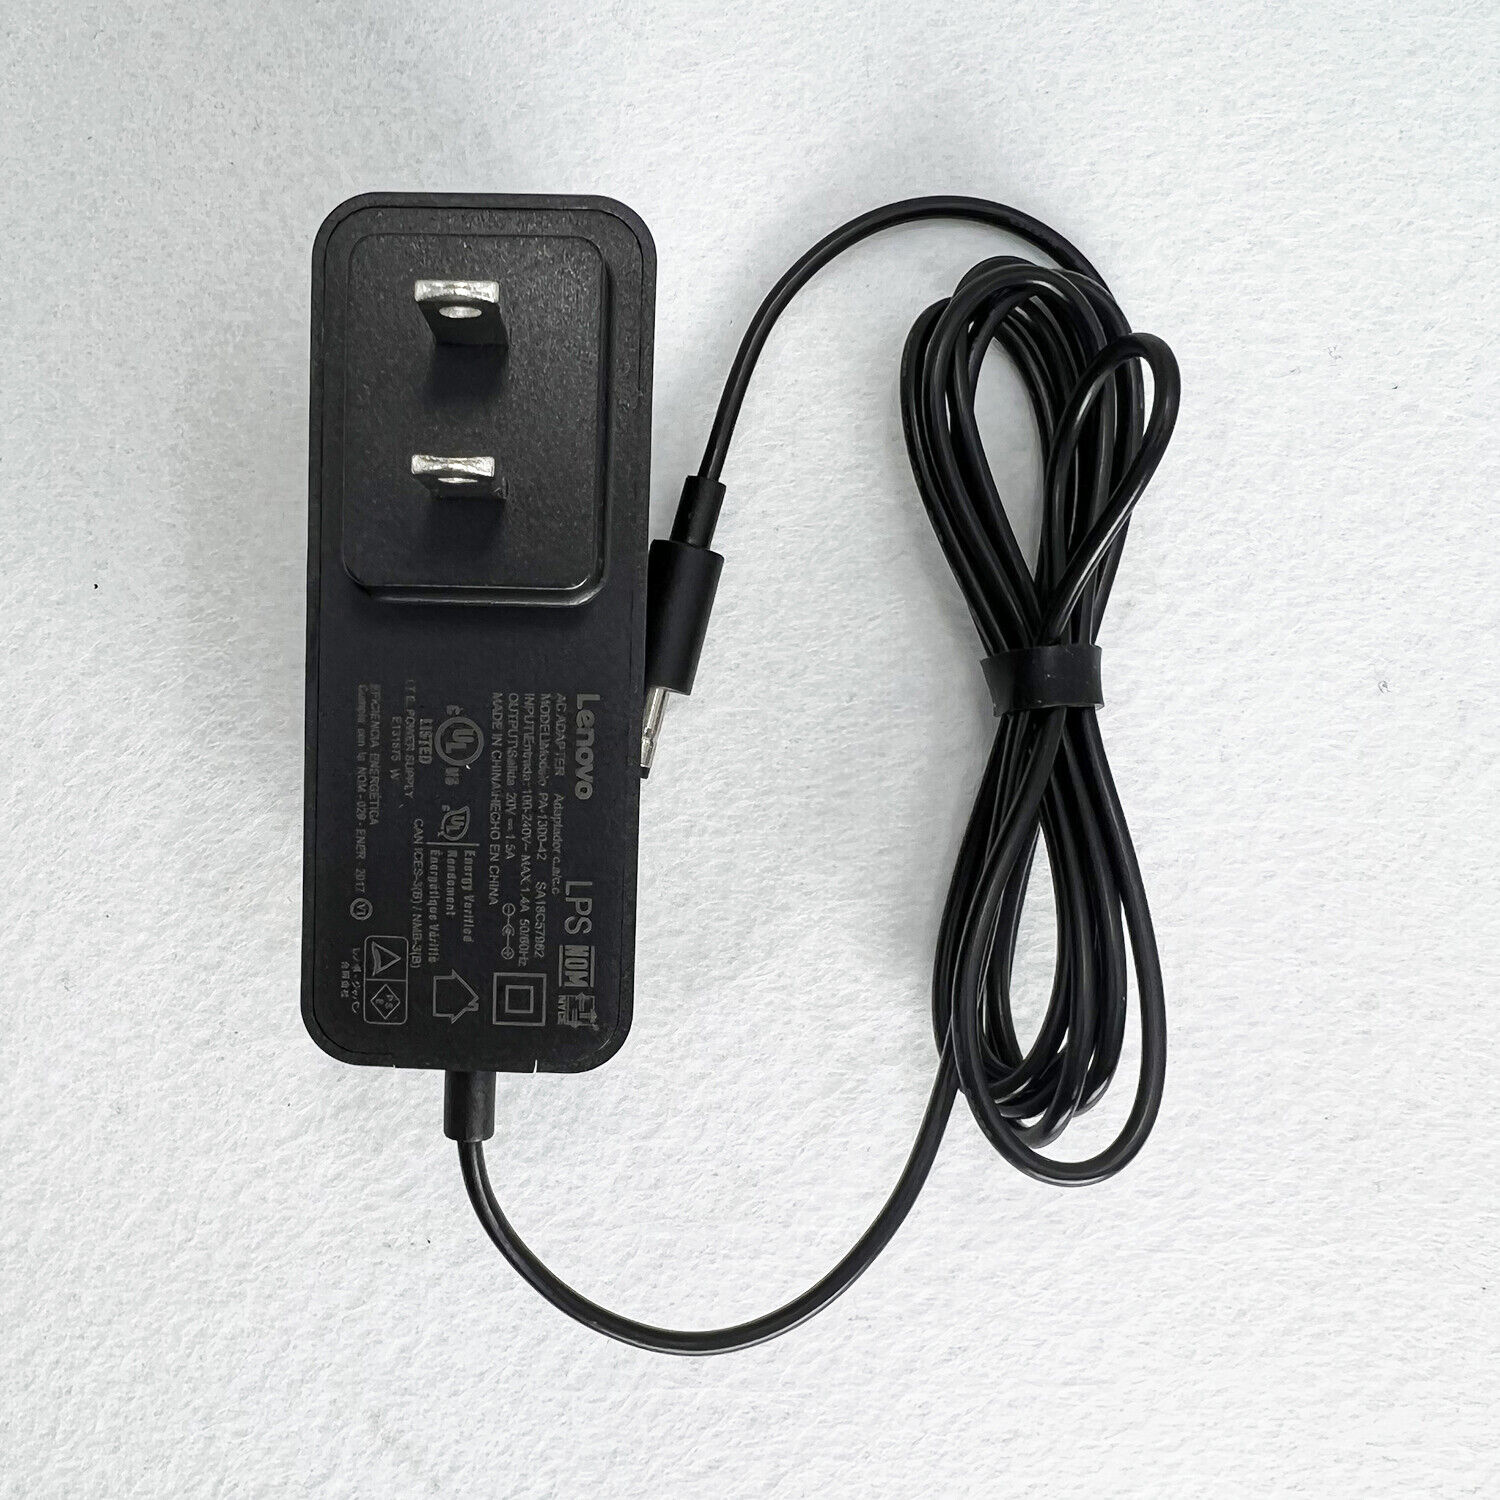 *Brand NEW*Lenovo 20V 1.5A PA-1300-42 for Smart Clock Smart Display AC Adapter Power Supply